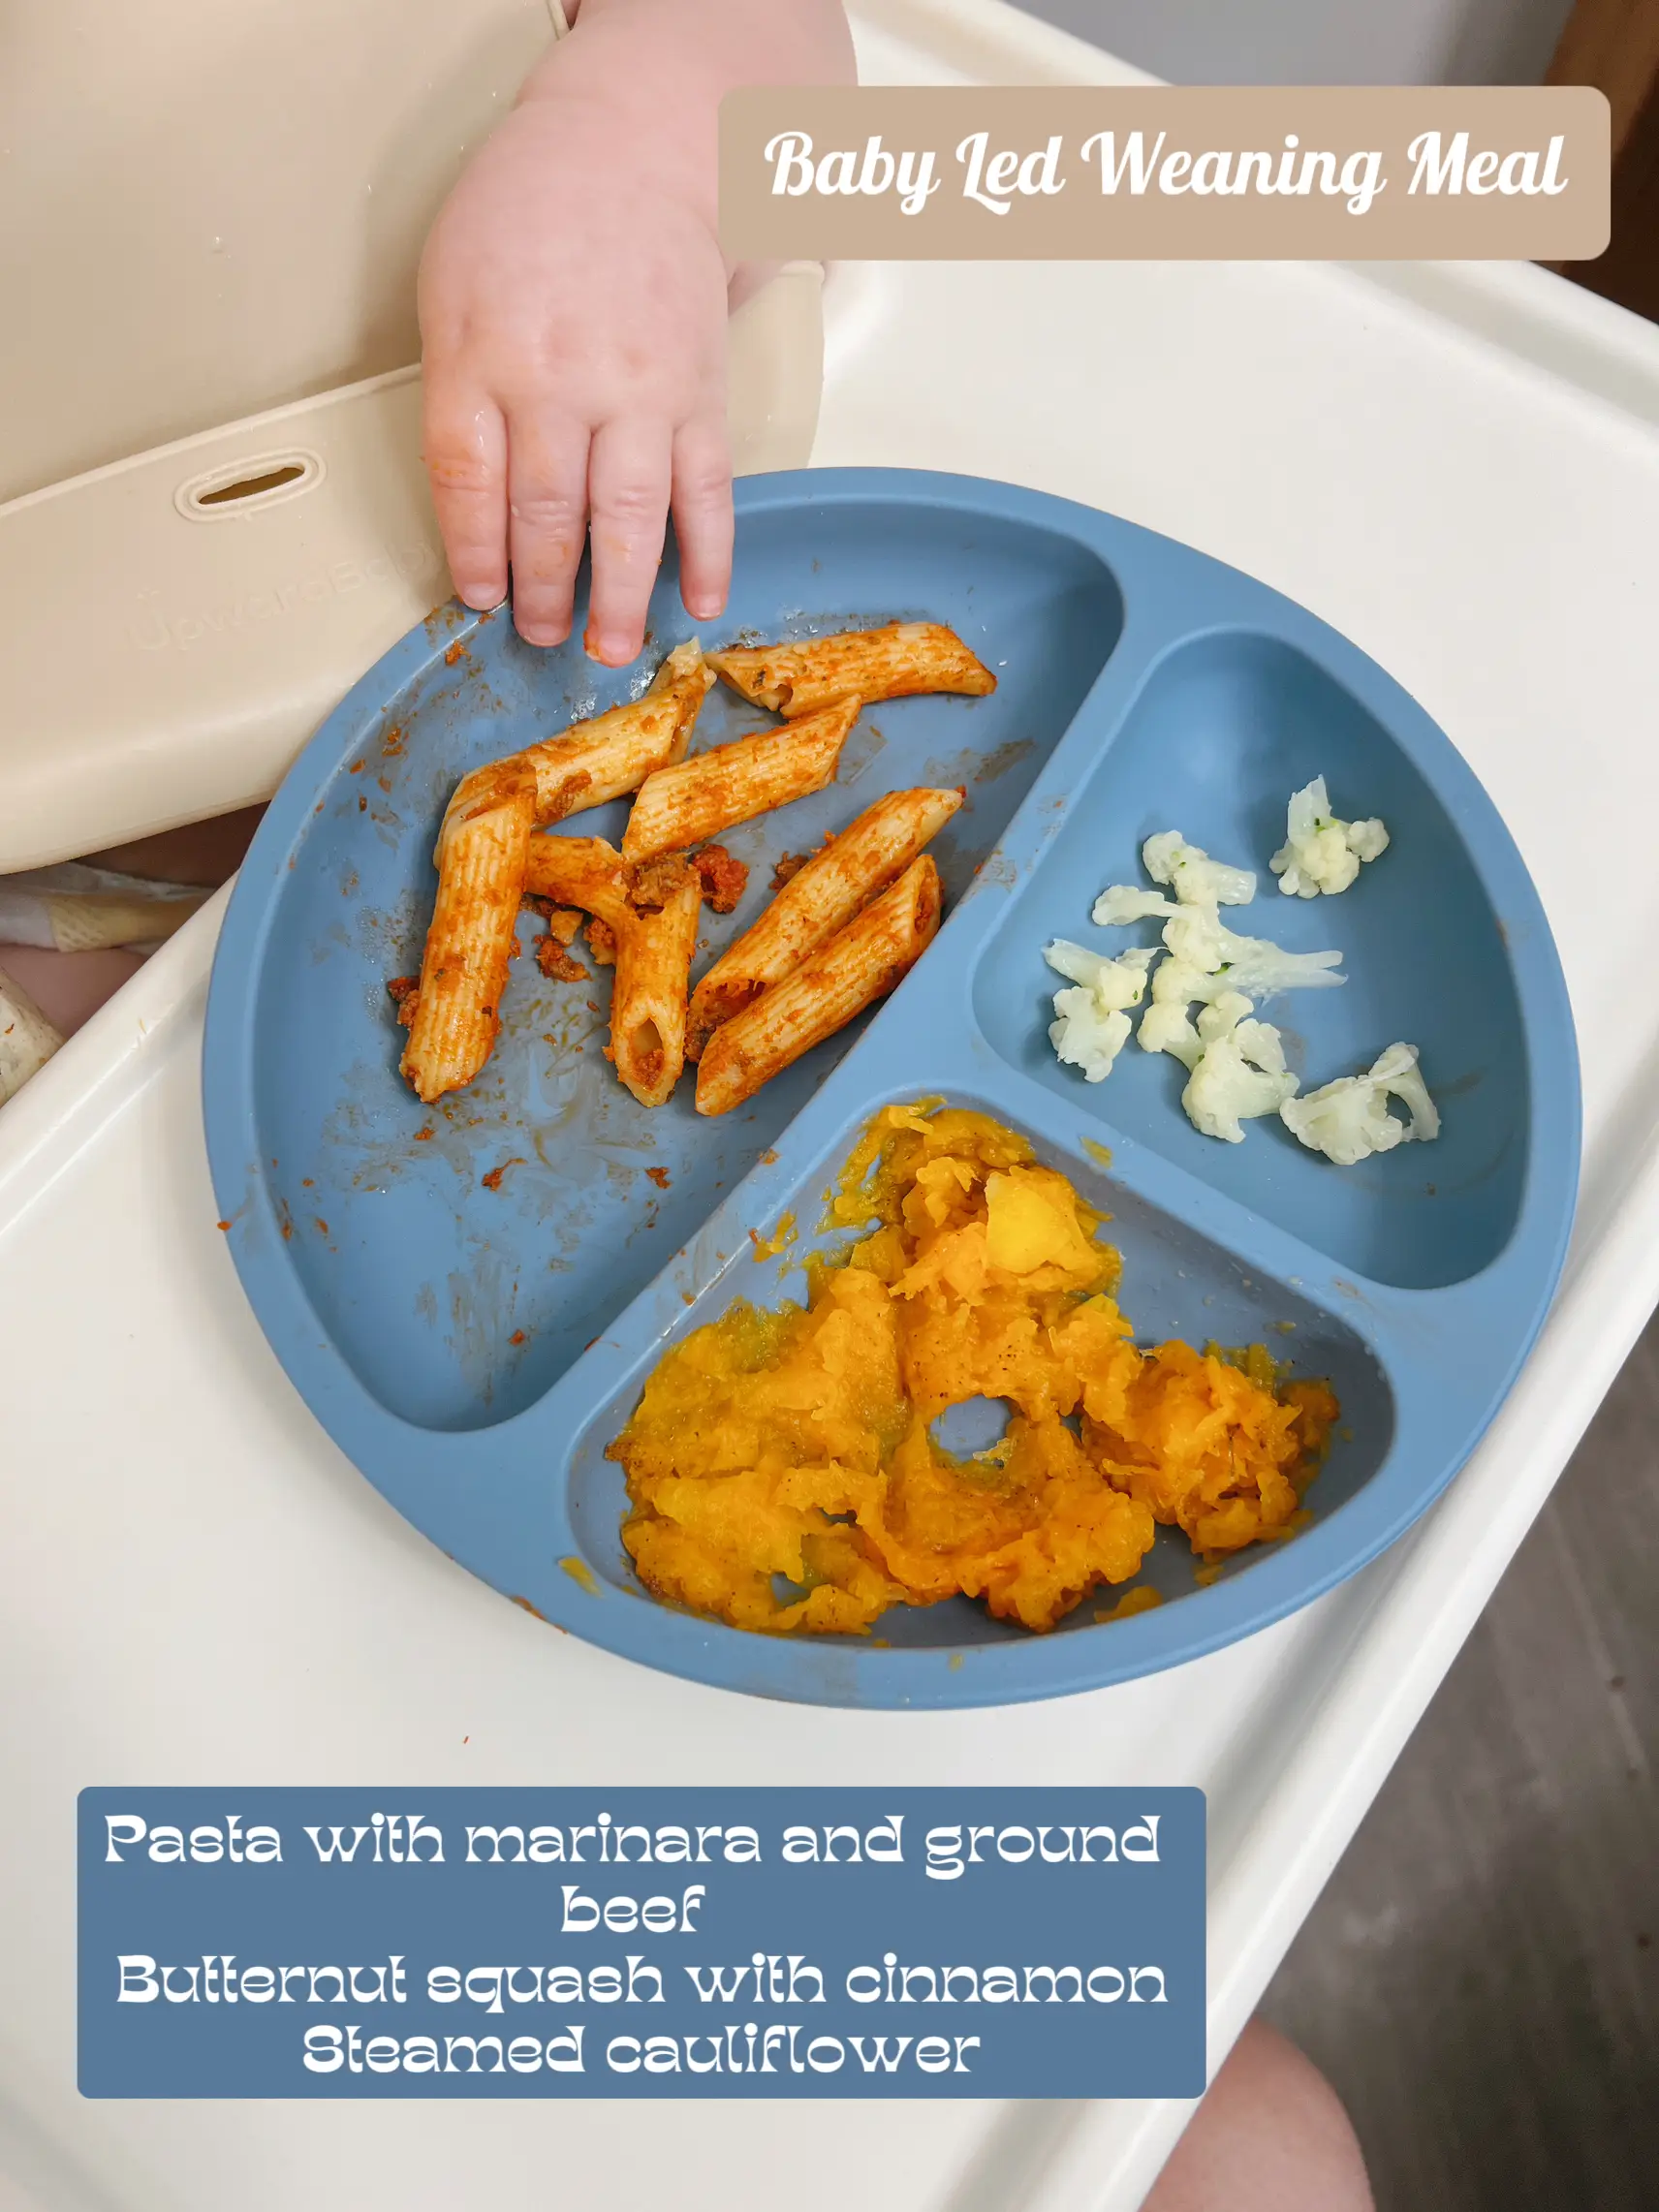 How to cut finger foods for baby-led weaning #baby #babyfood #babyledweaning